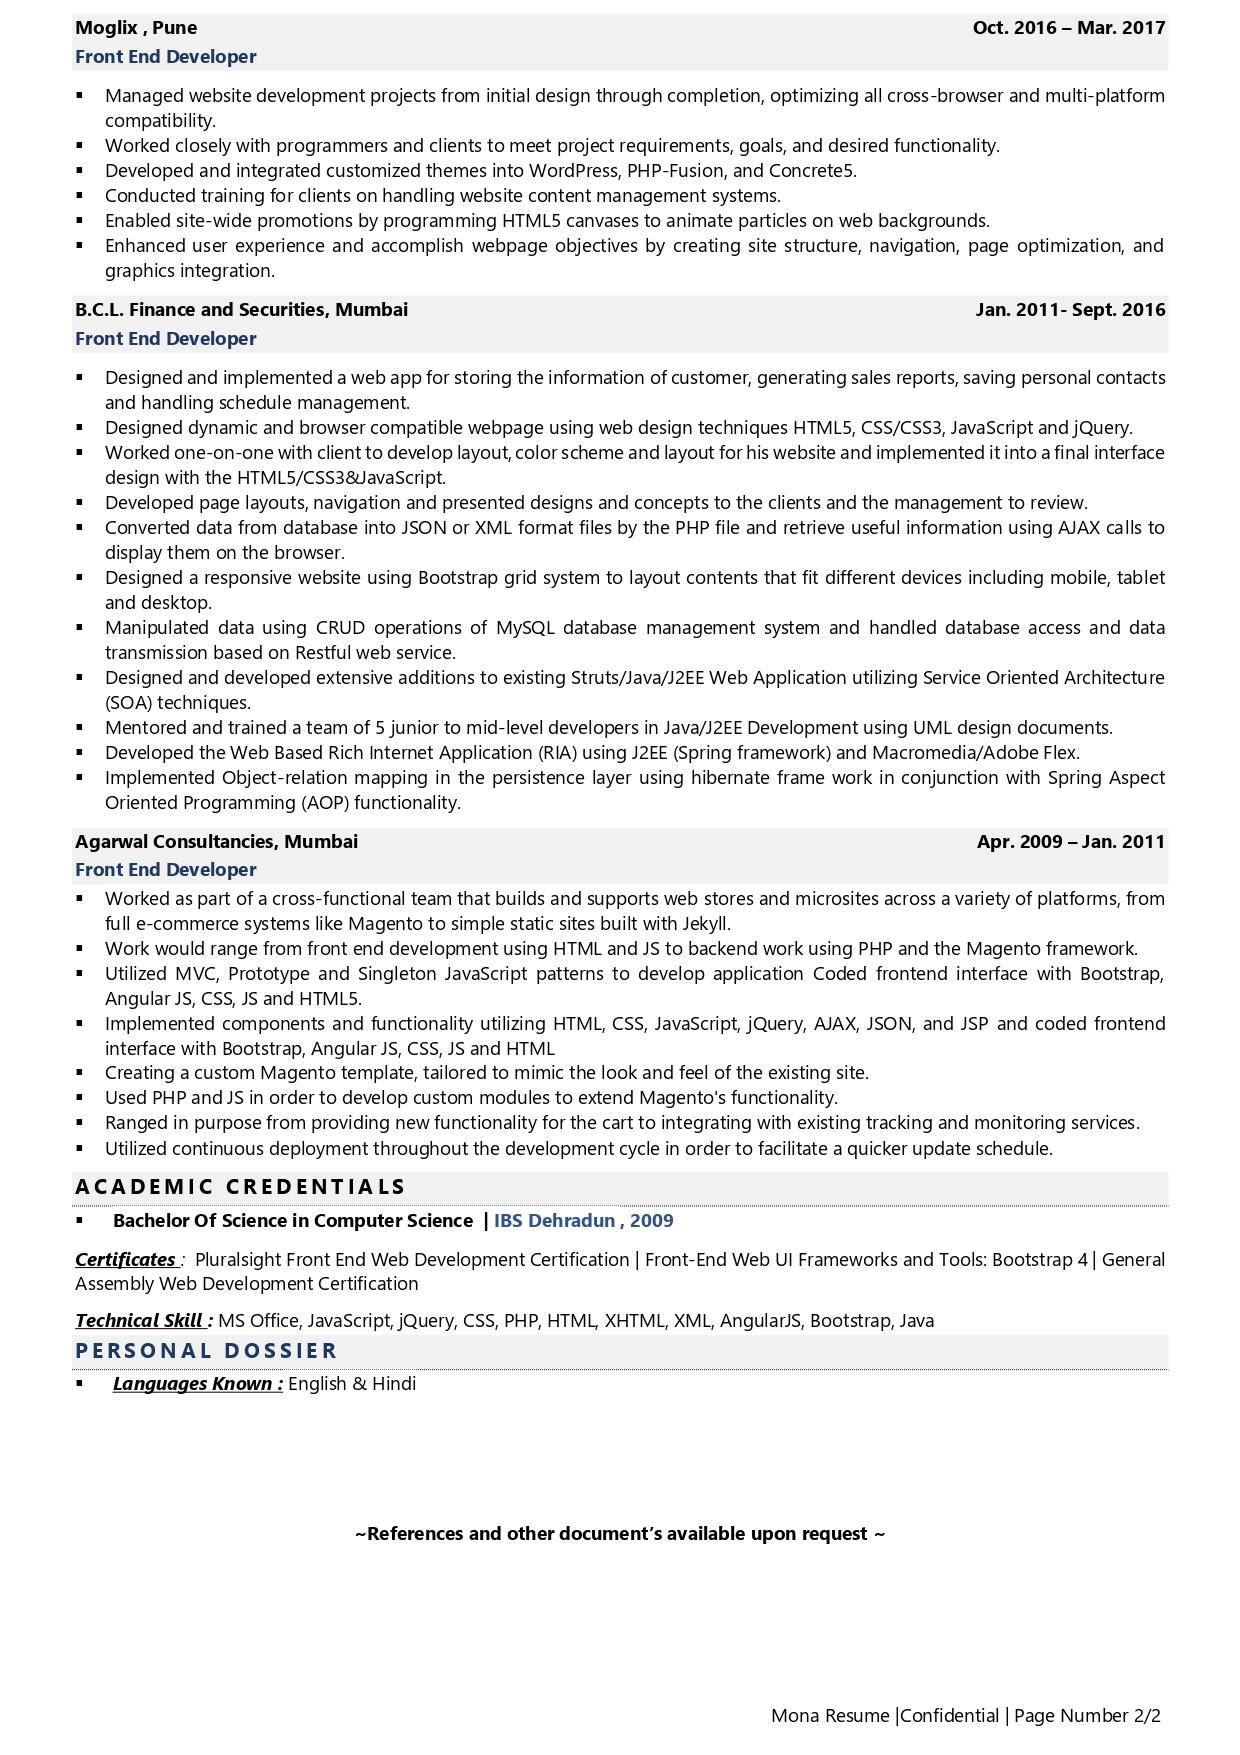 frontend resume